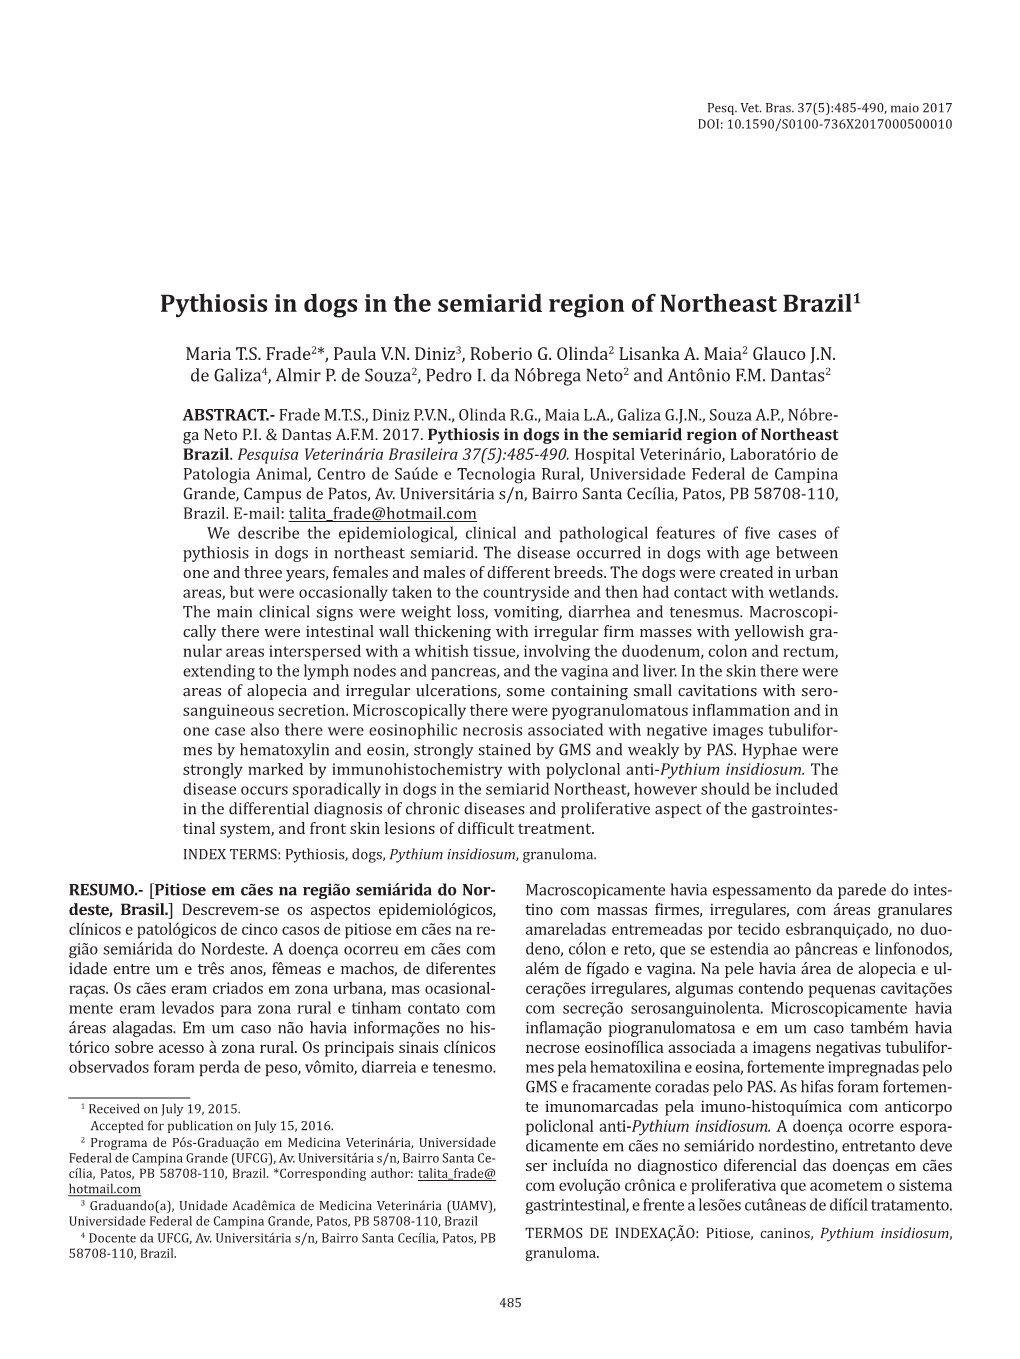 Pythiosis in Dogs in the Semiarid Region of Northeast Brazil1